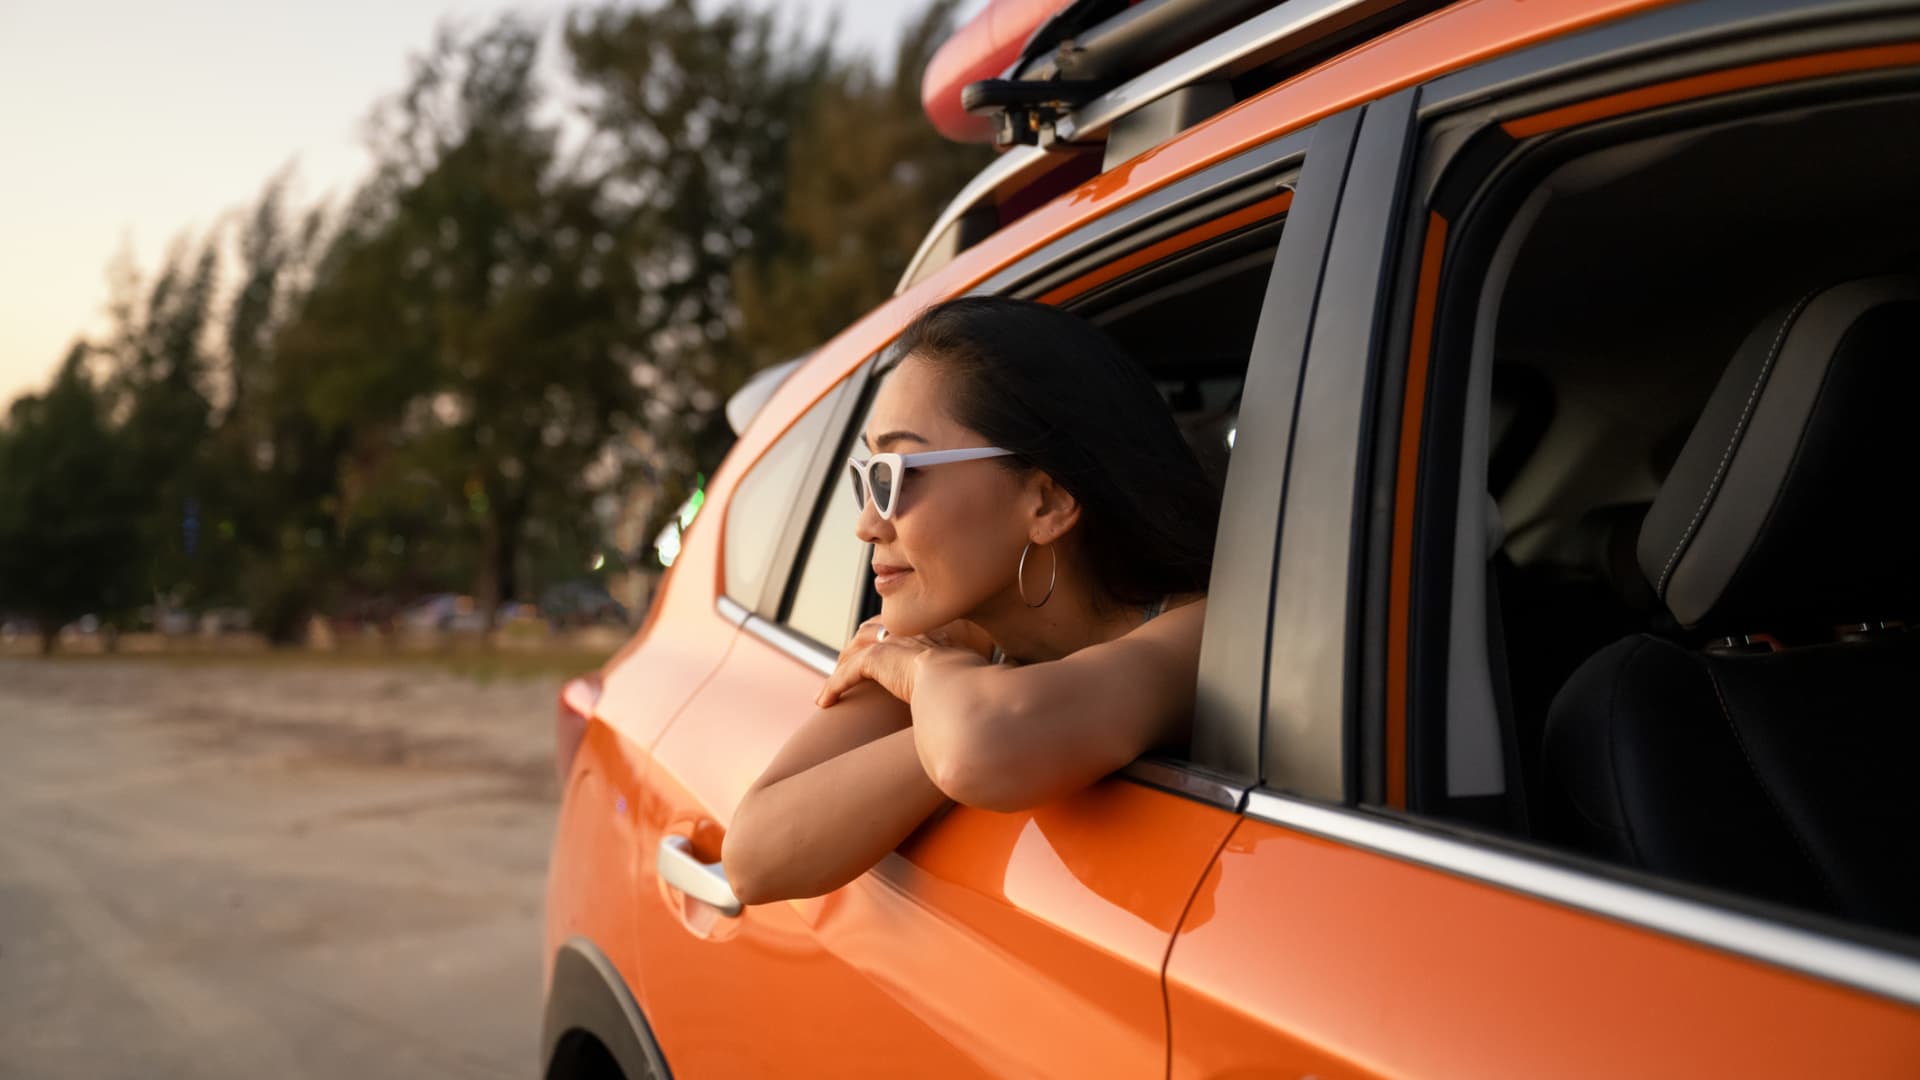 Renting a car for a road trip, or driving yourself? 5 things to consider